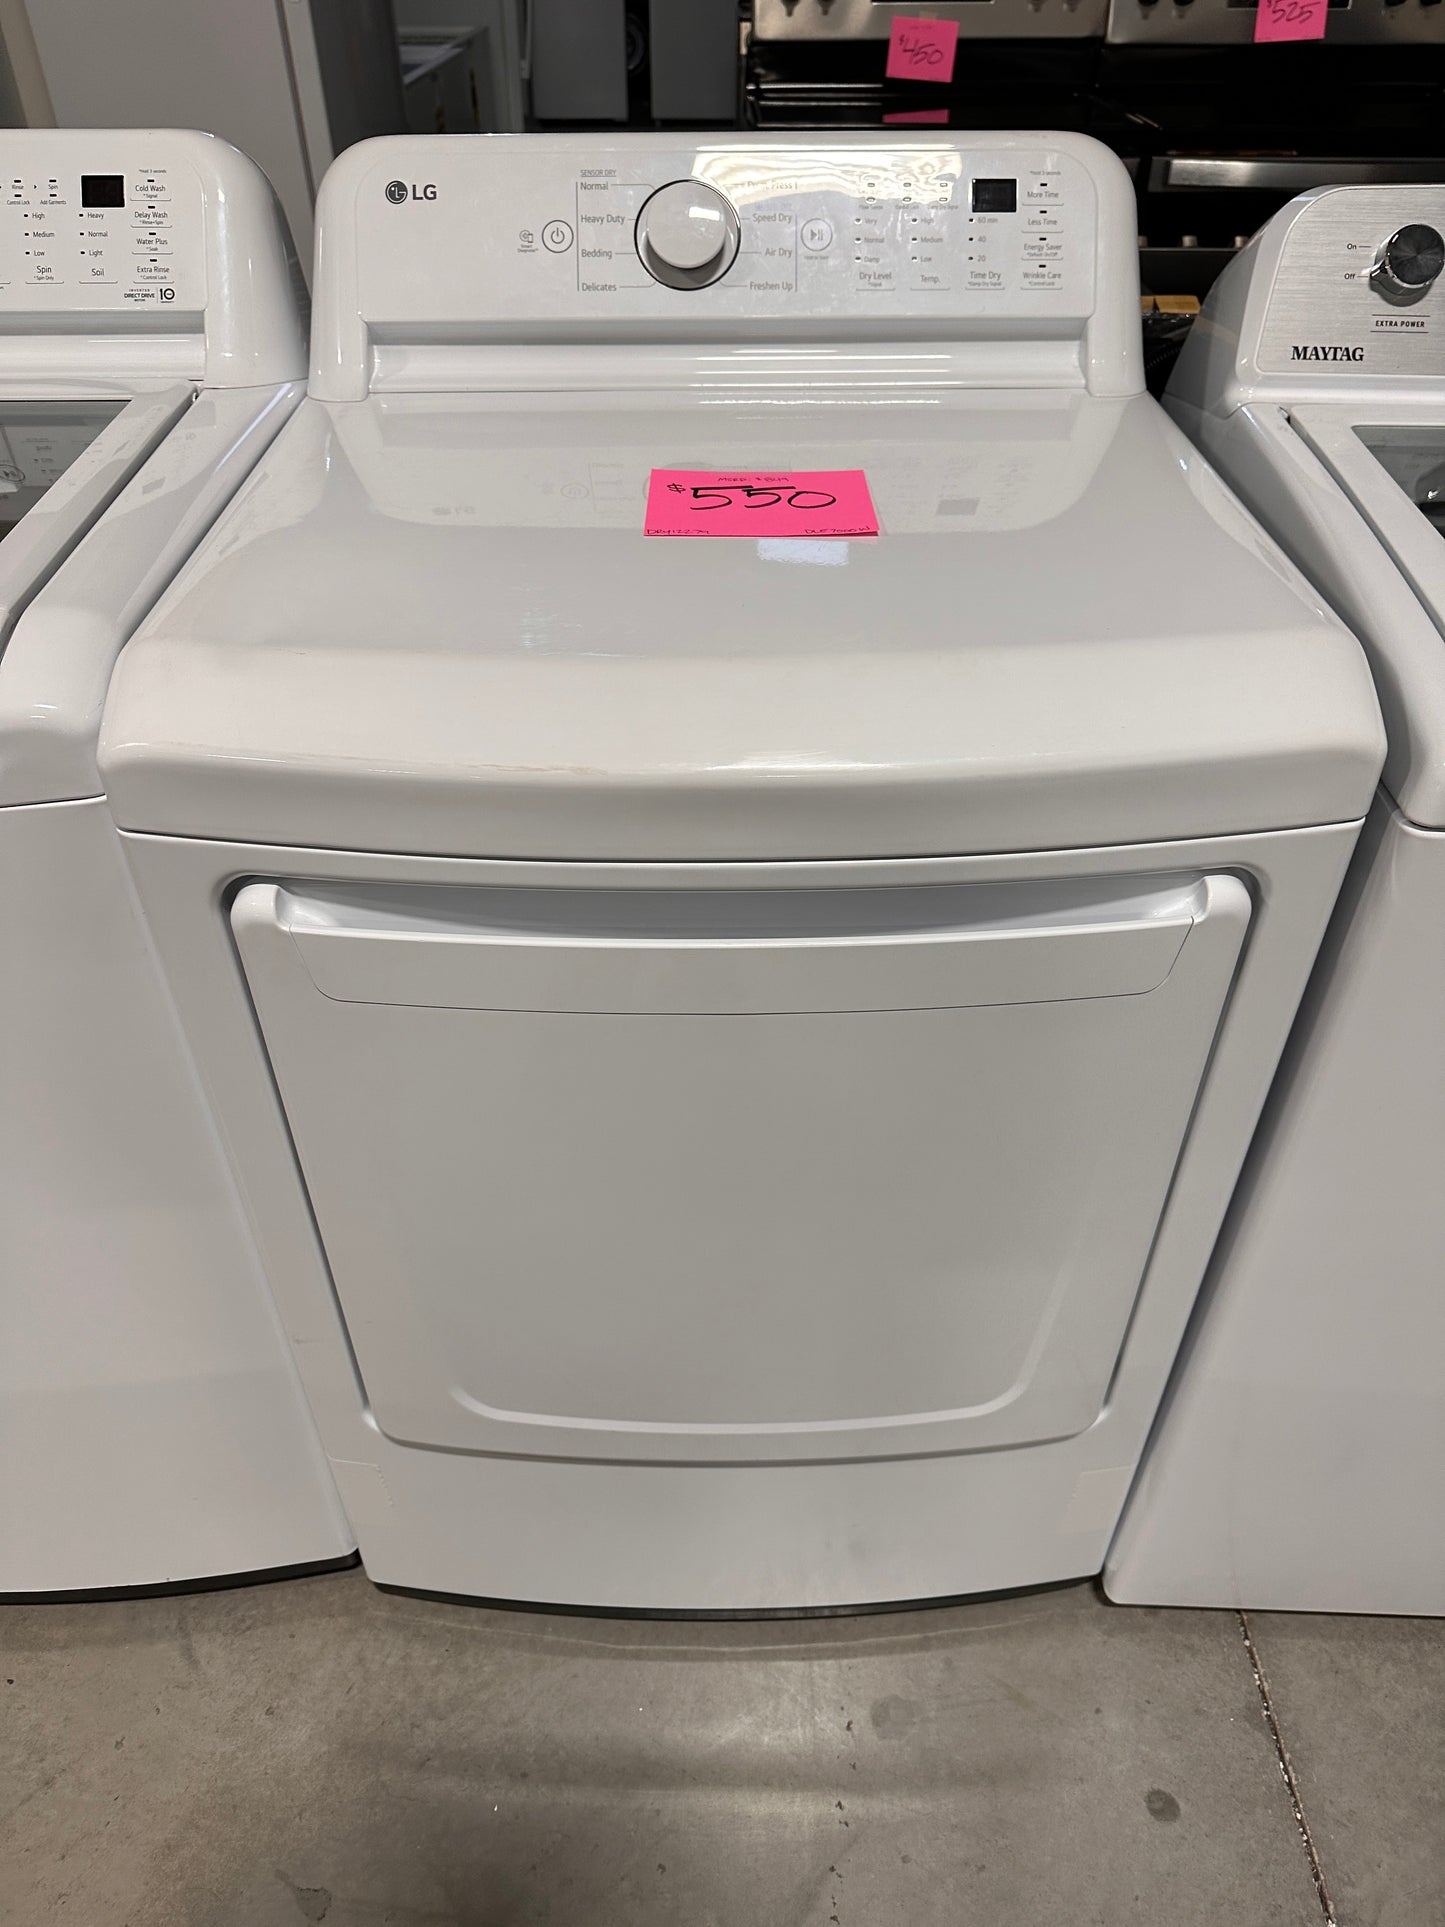 ELECTRIC DRYER WITH SENSOR DRY - DRY12279 DLE7000W